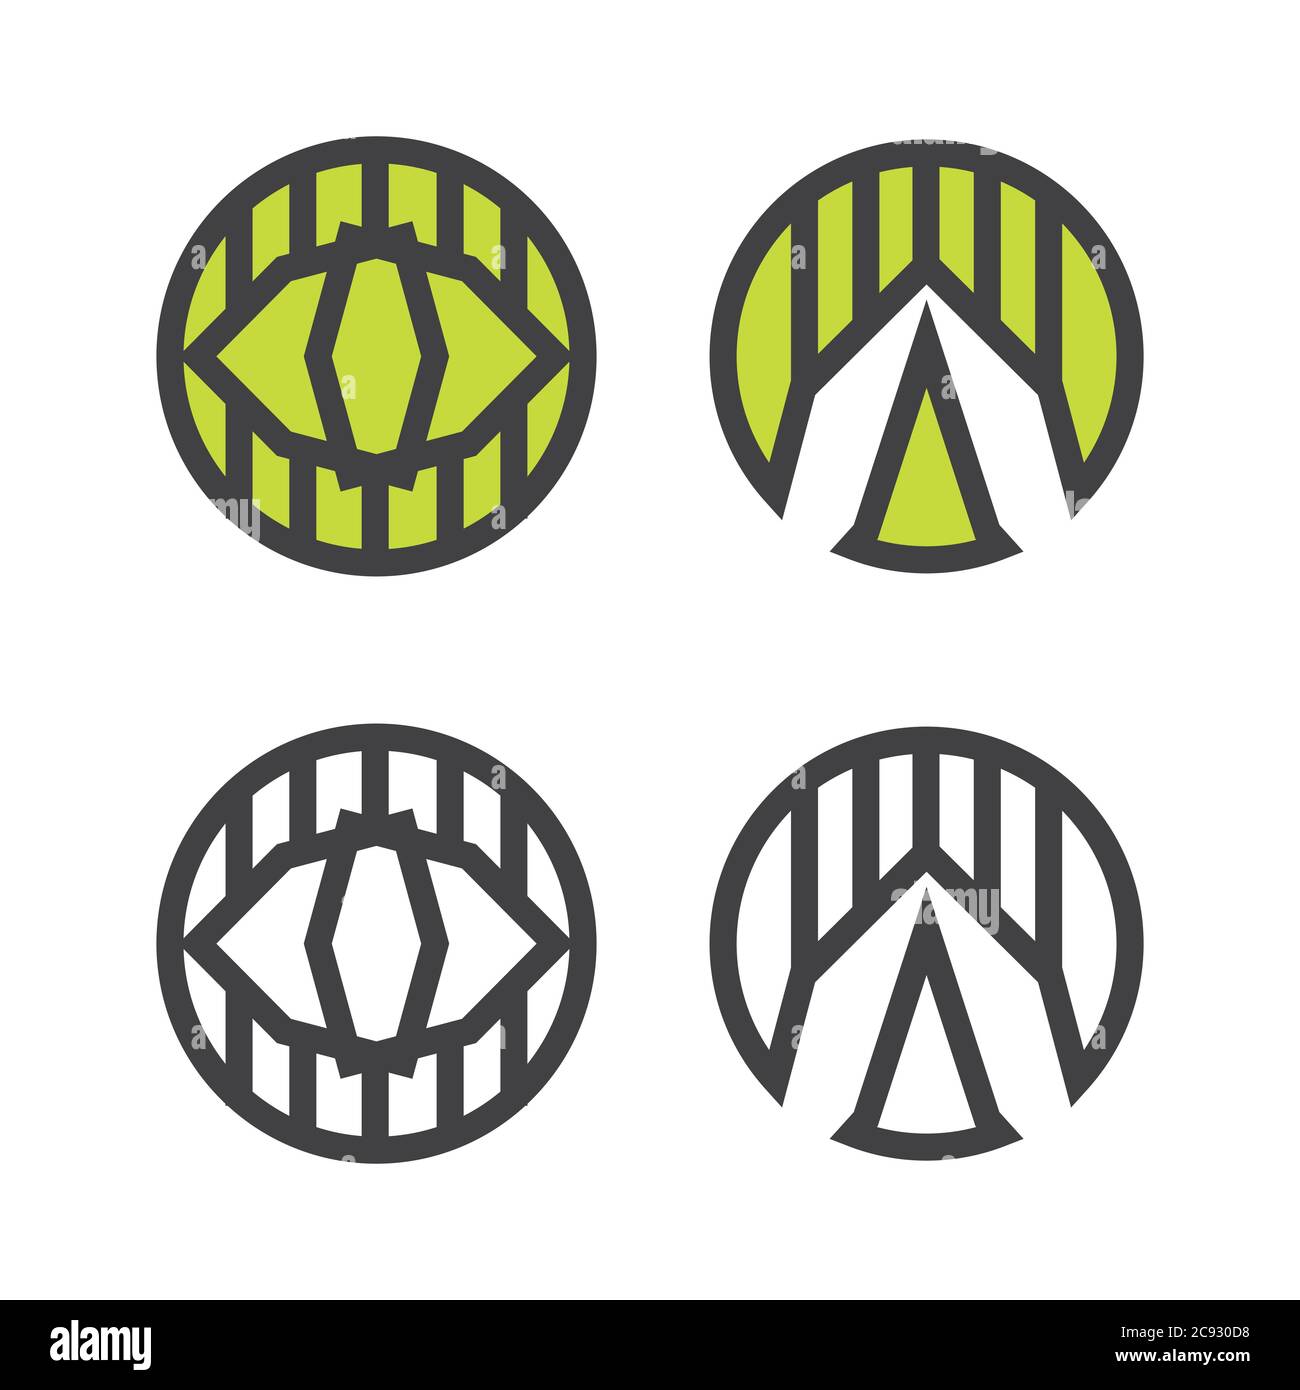 Hipster style icons, labels for logo design. Abstract geometric pattern shapes template, possible deconstruction. Stock Vector